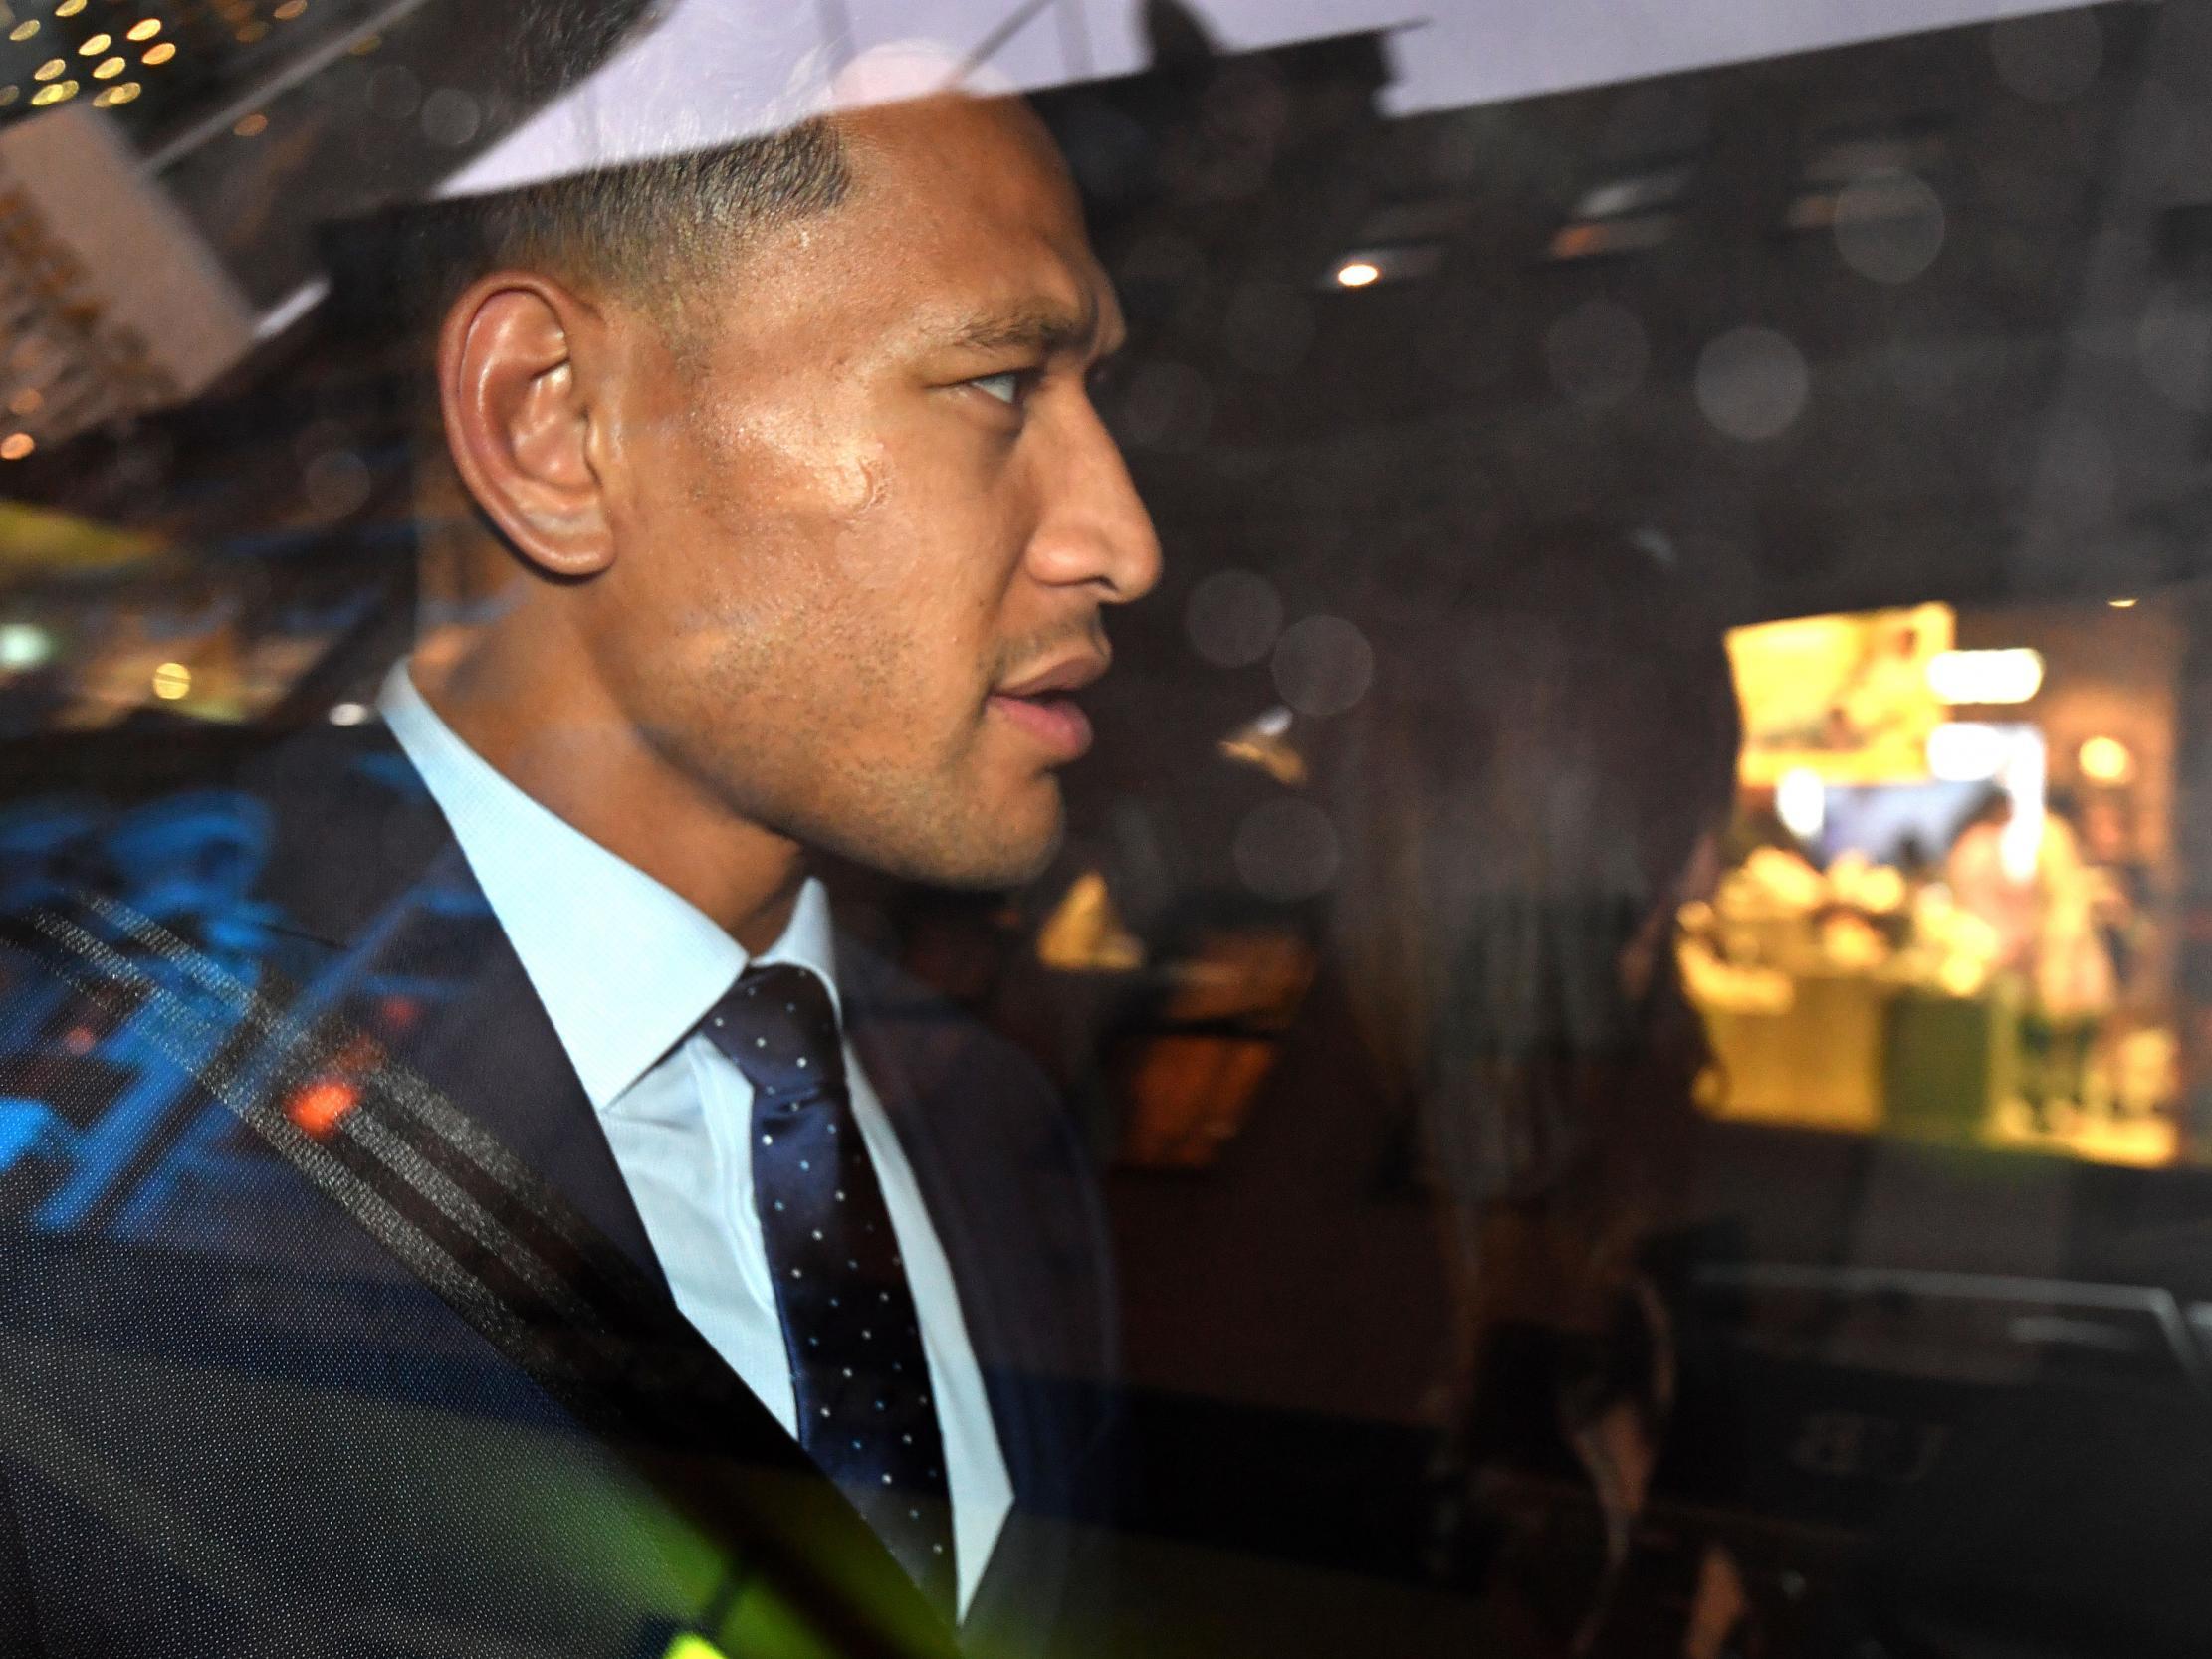 Legal representatives for Folau have confirmed they have filed an application to the Australian Fair Work Commission